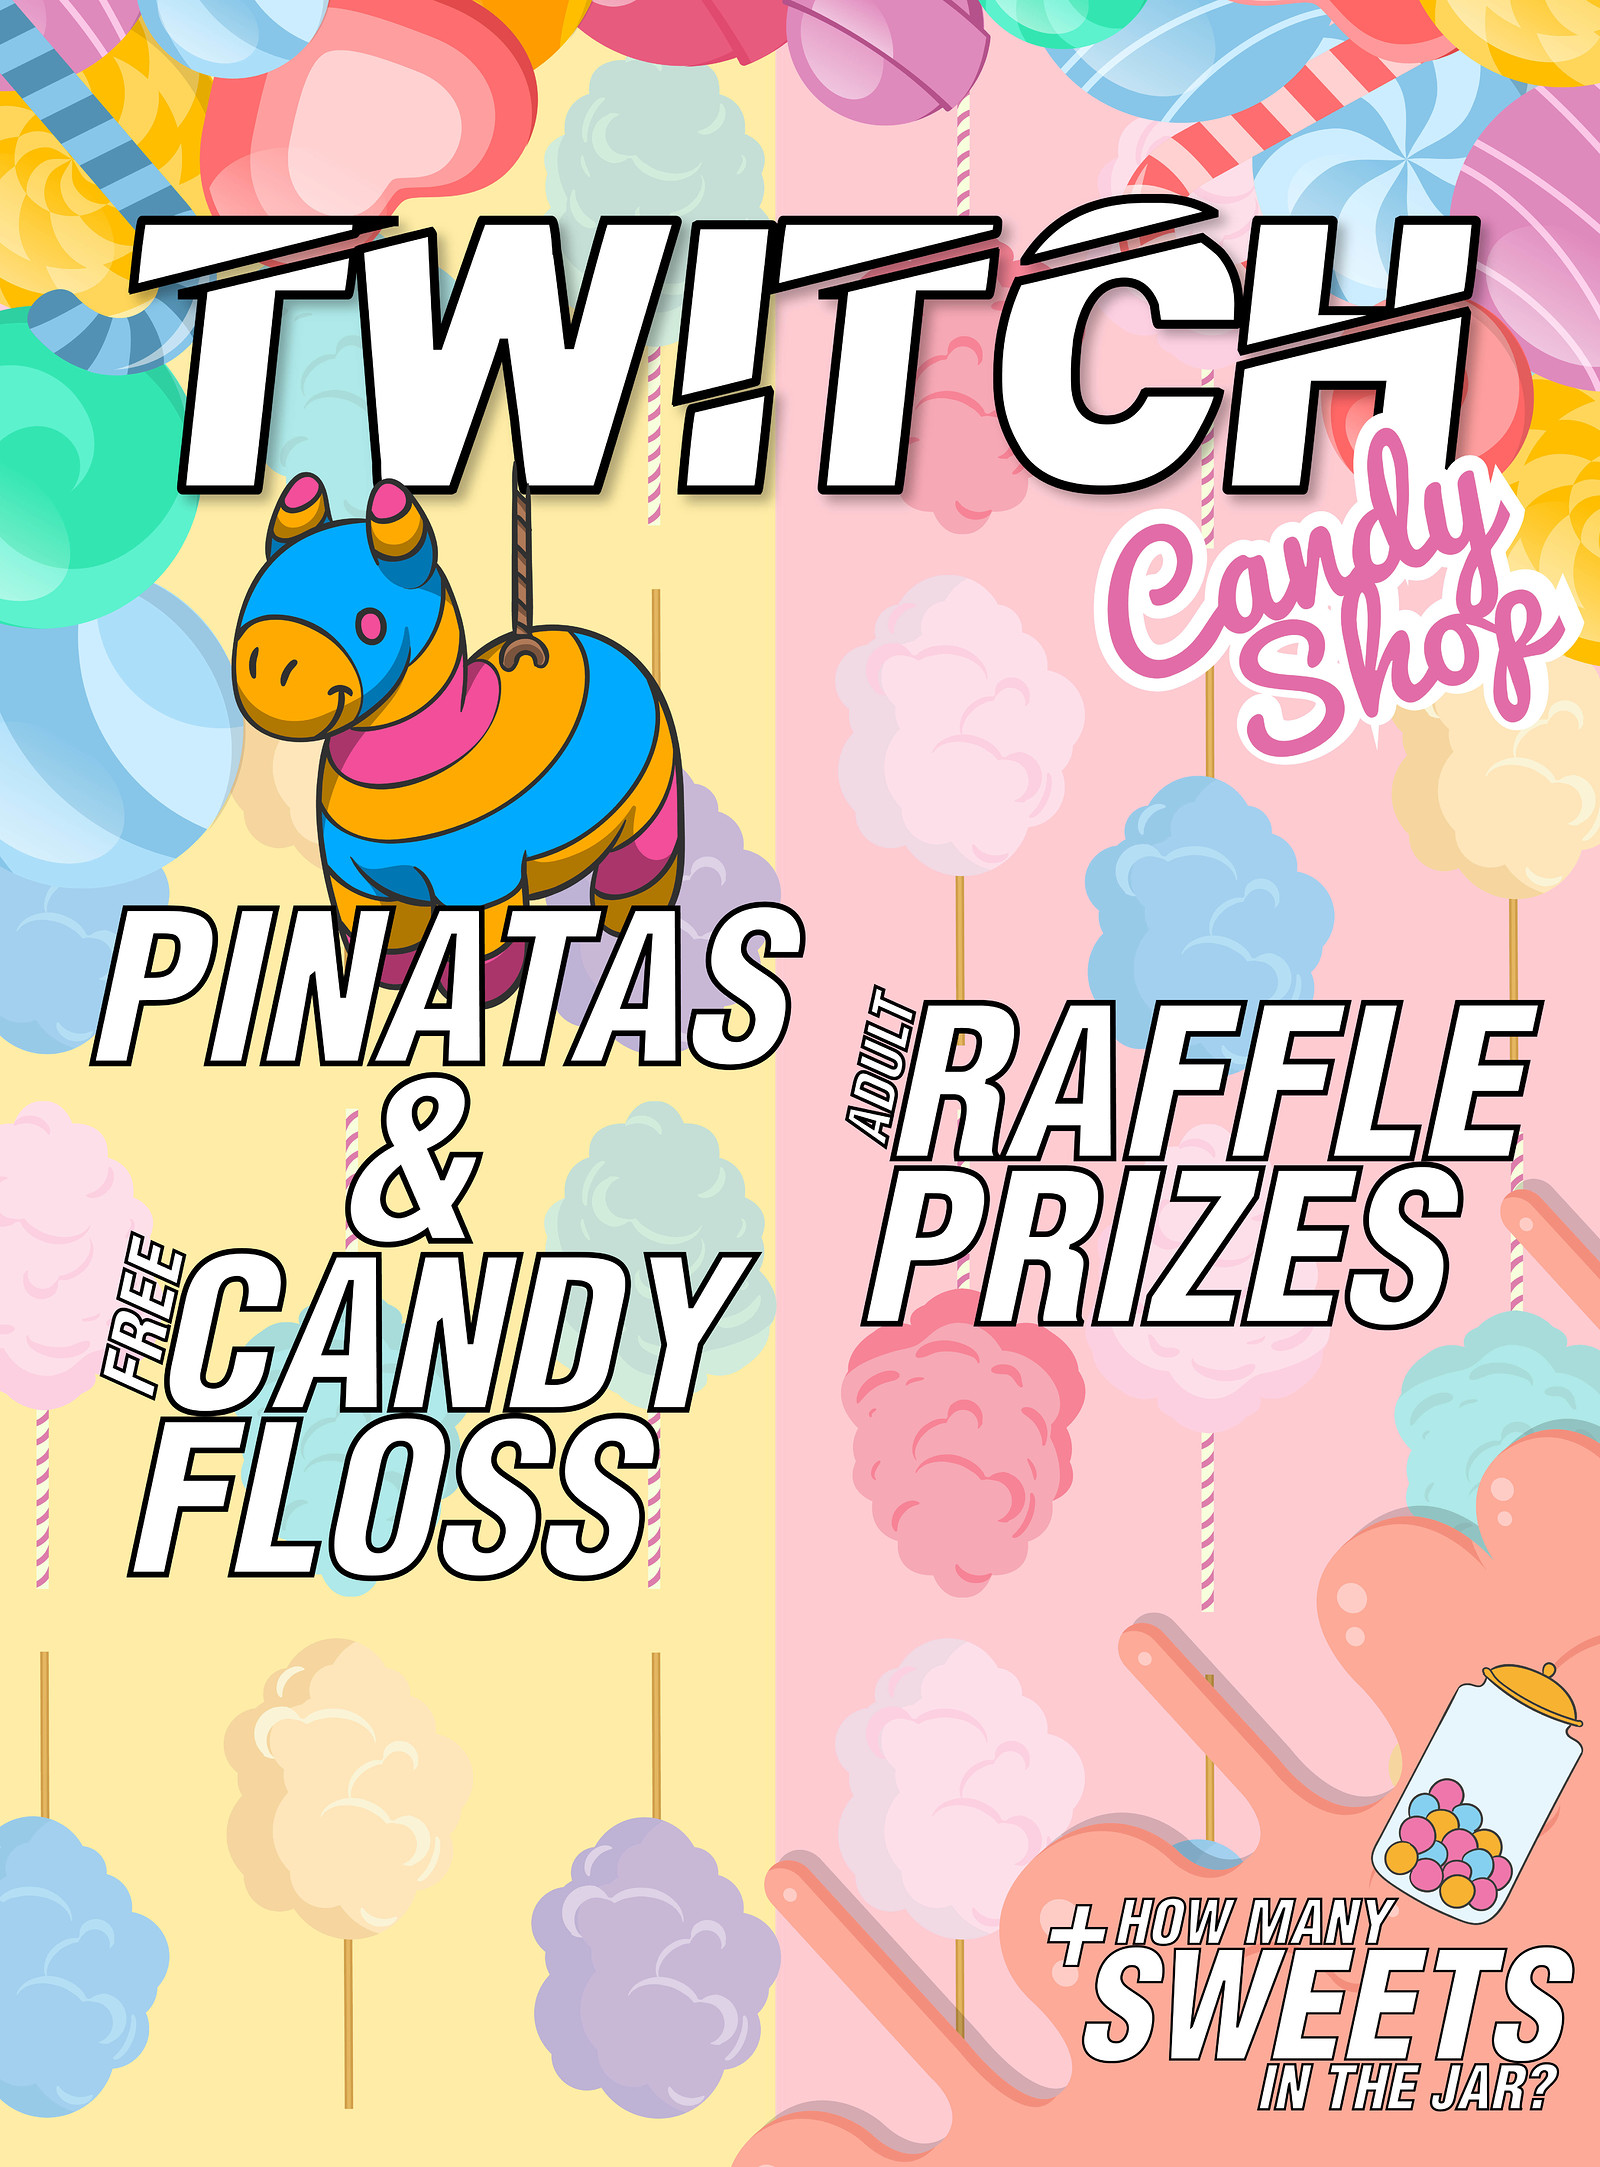 Twitch Wednesdays - The Candy Shop at The Elbow Room